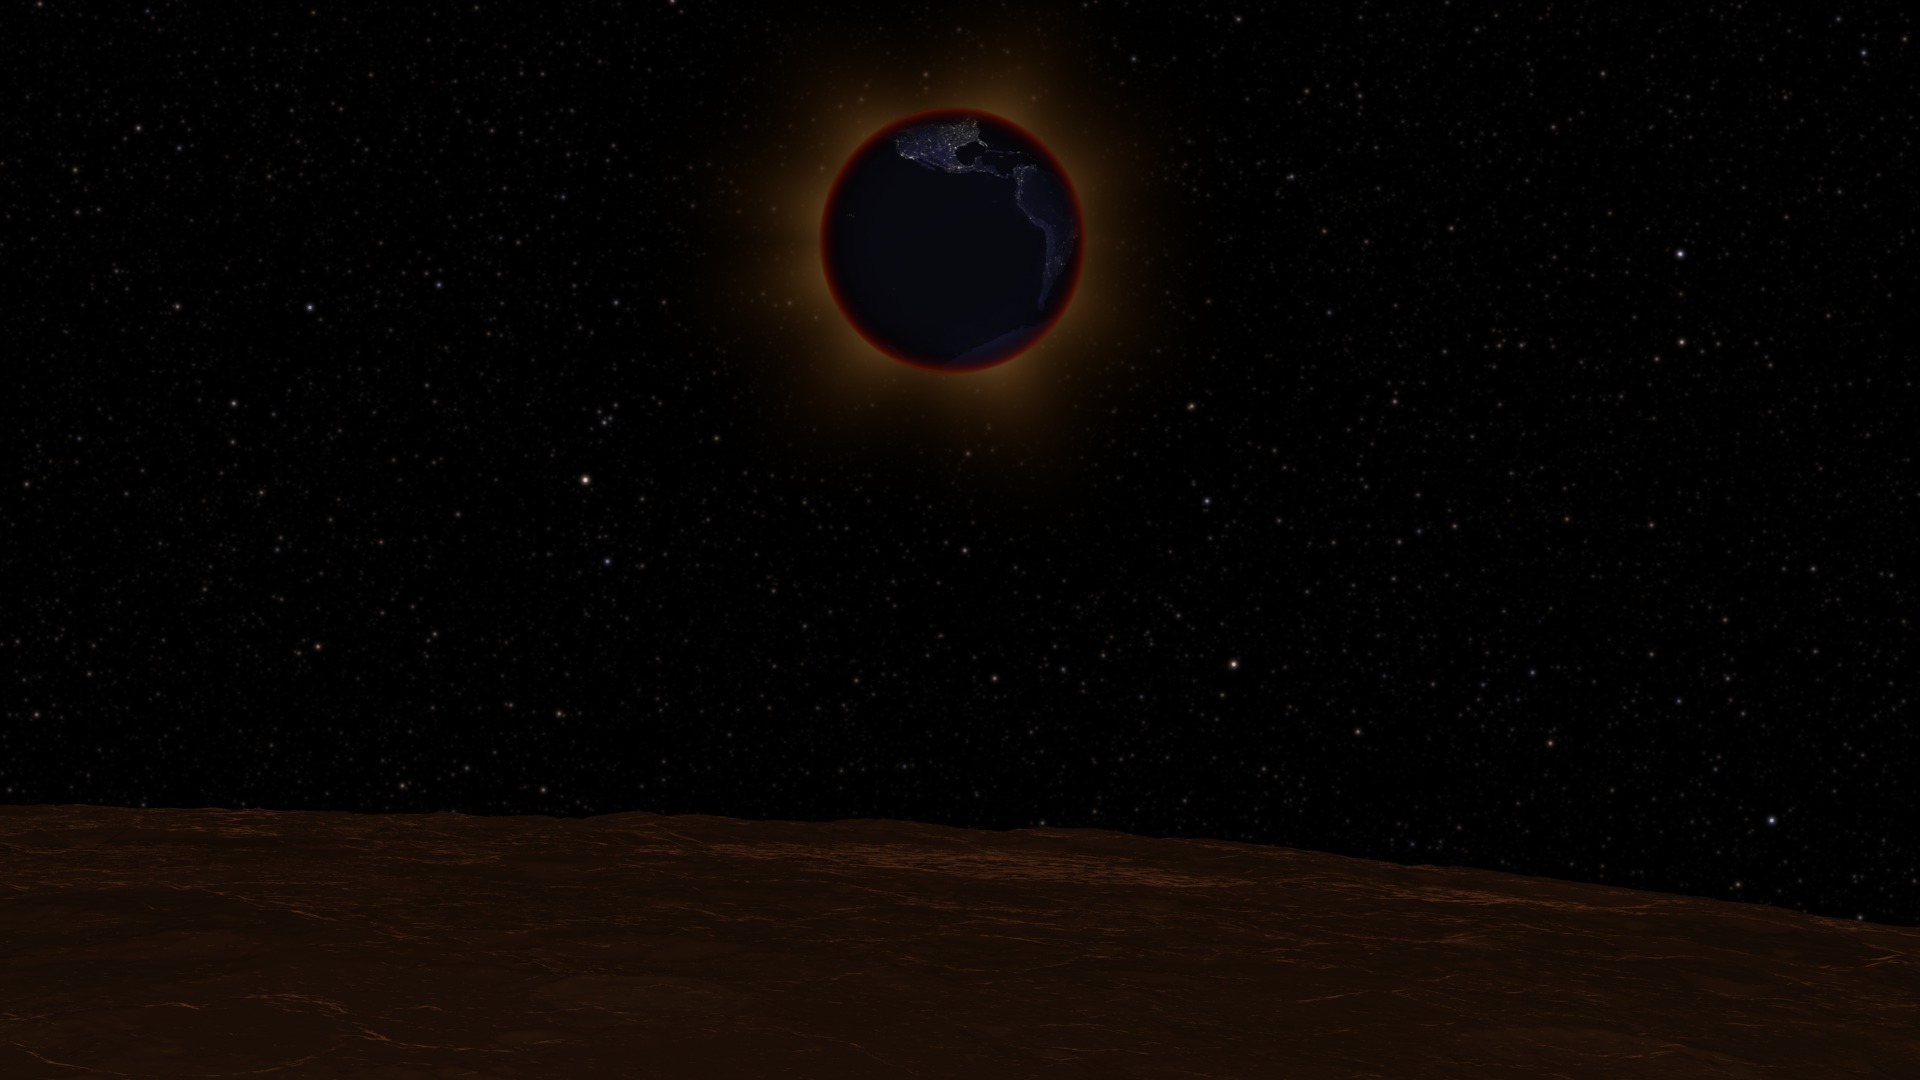 With the lunar horizon in the foreground, the Earth passes in front of the Sun, revealing the red ring of sunrises and sunsets along the limb of the Earth. The "No Stars" frames omit the starry background and include an alpha channel.